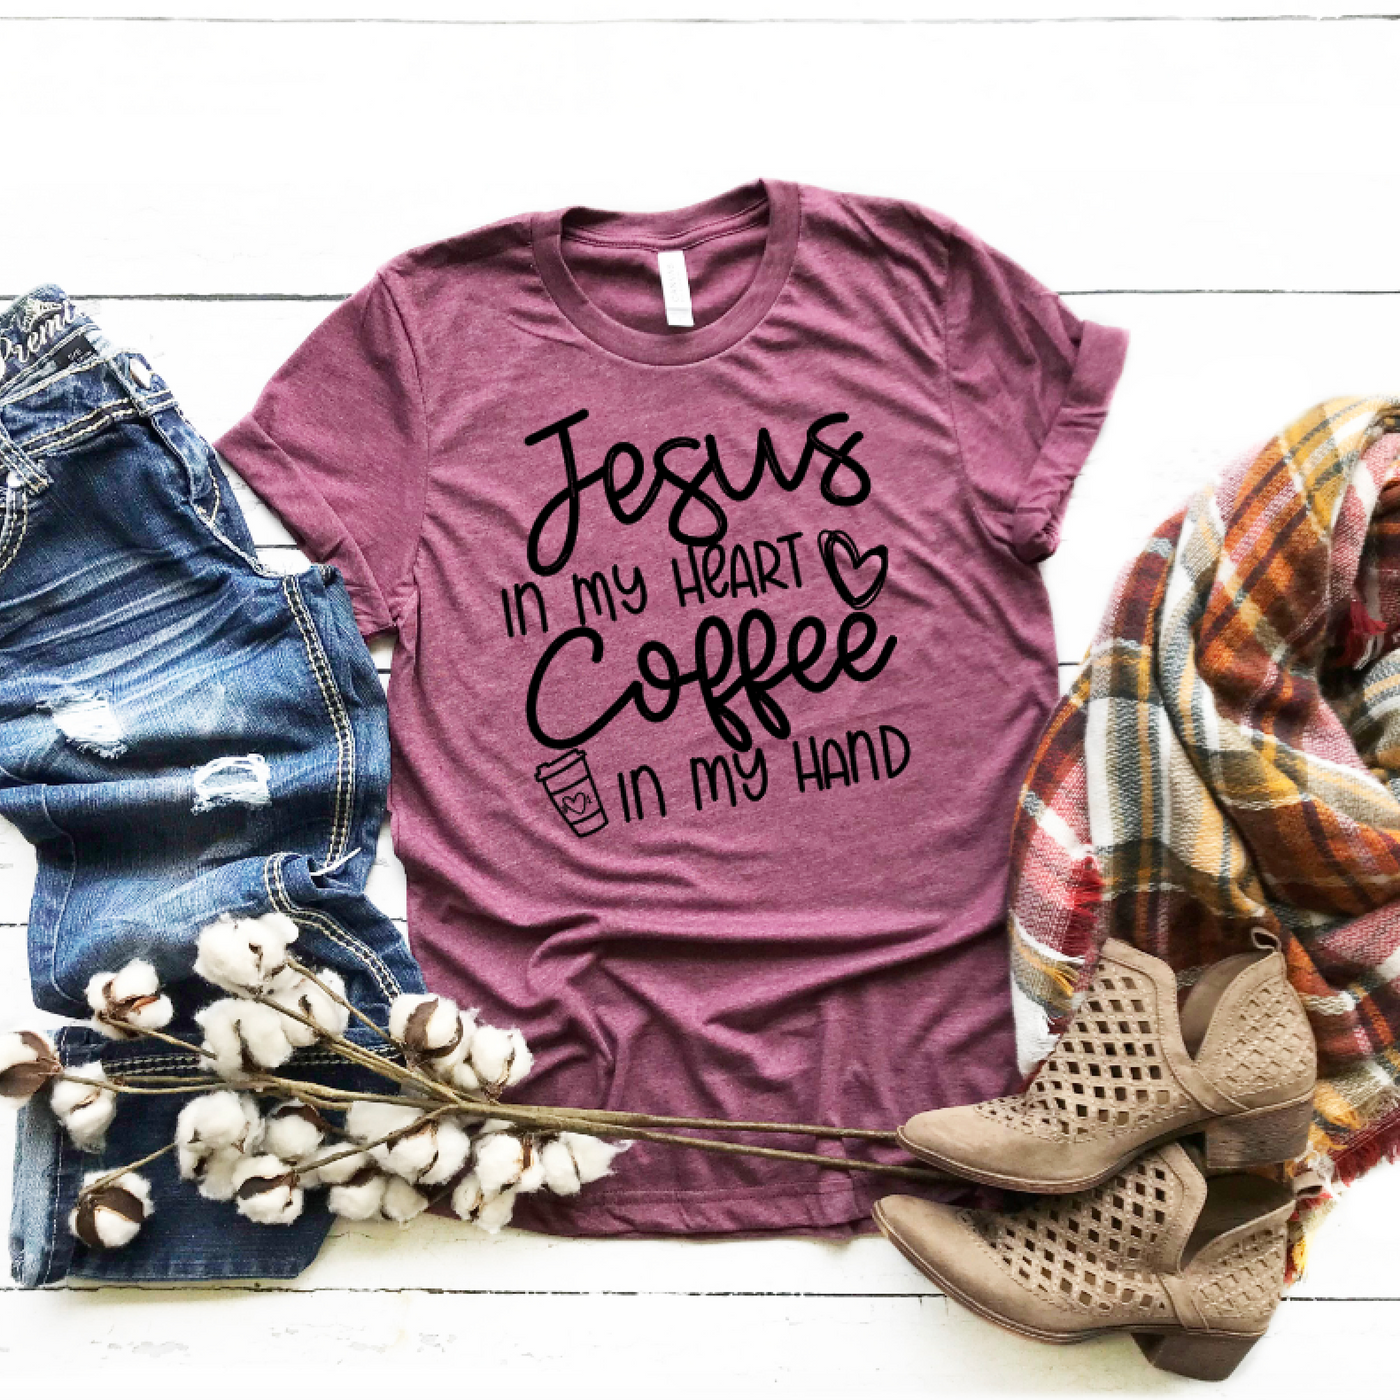 CLEARANCE "Jesus in my Heart, Coffee in my Hand" T-shirt